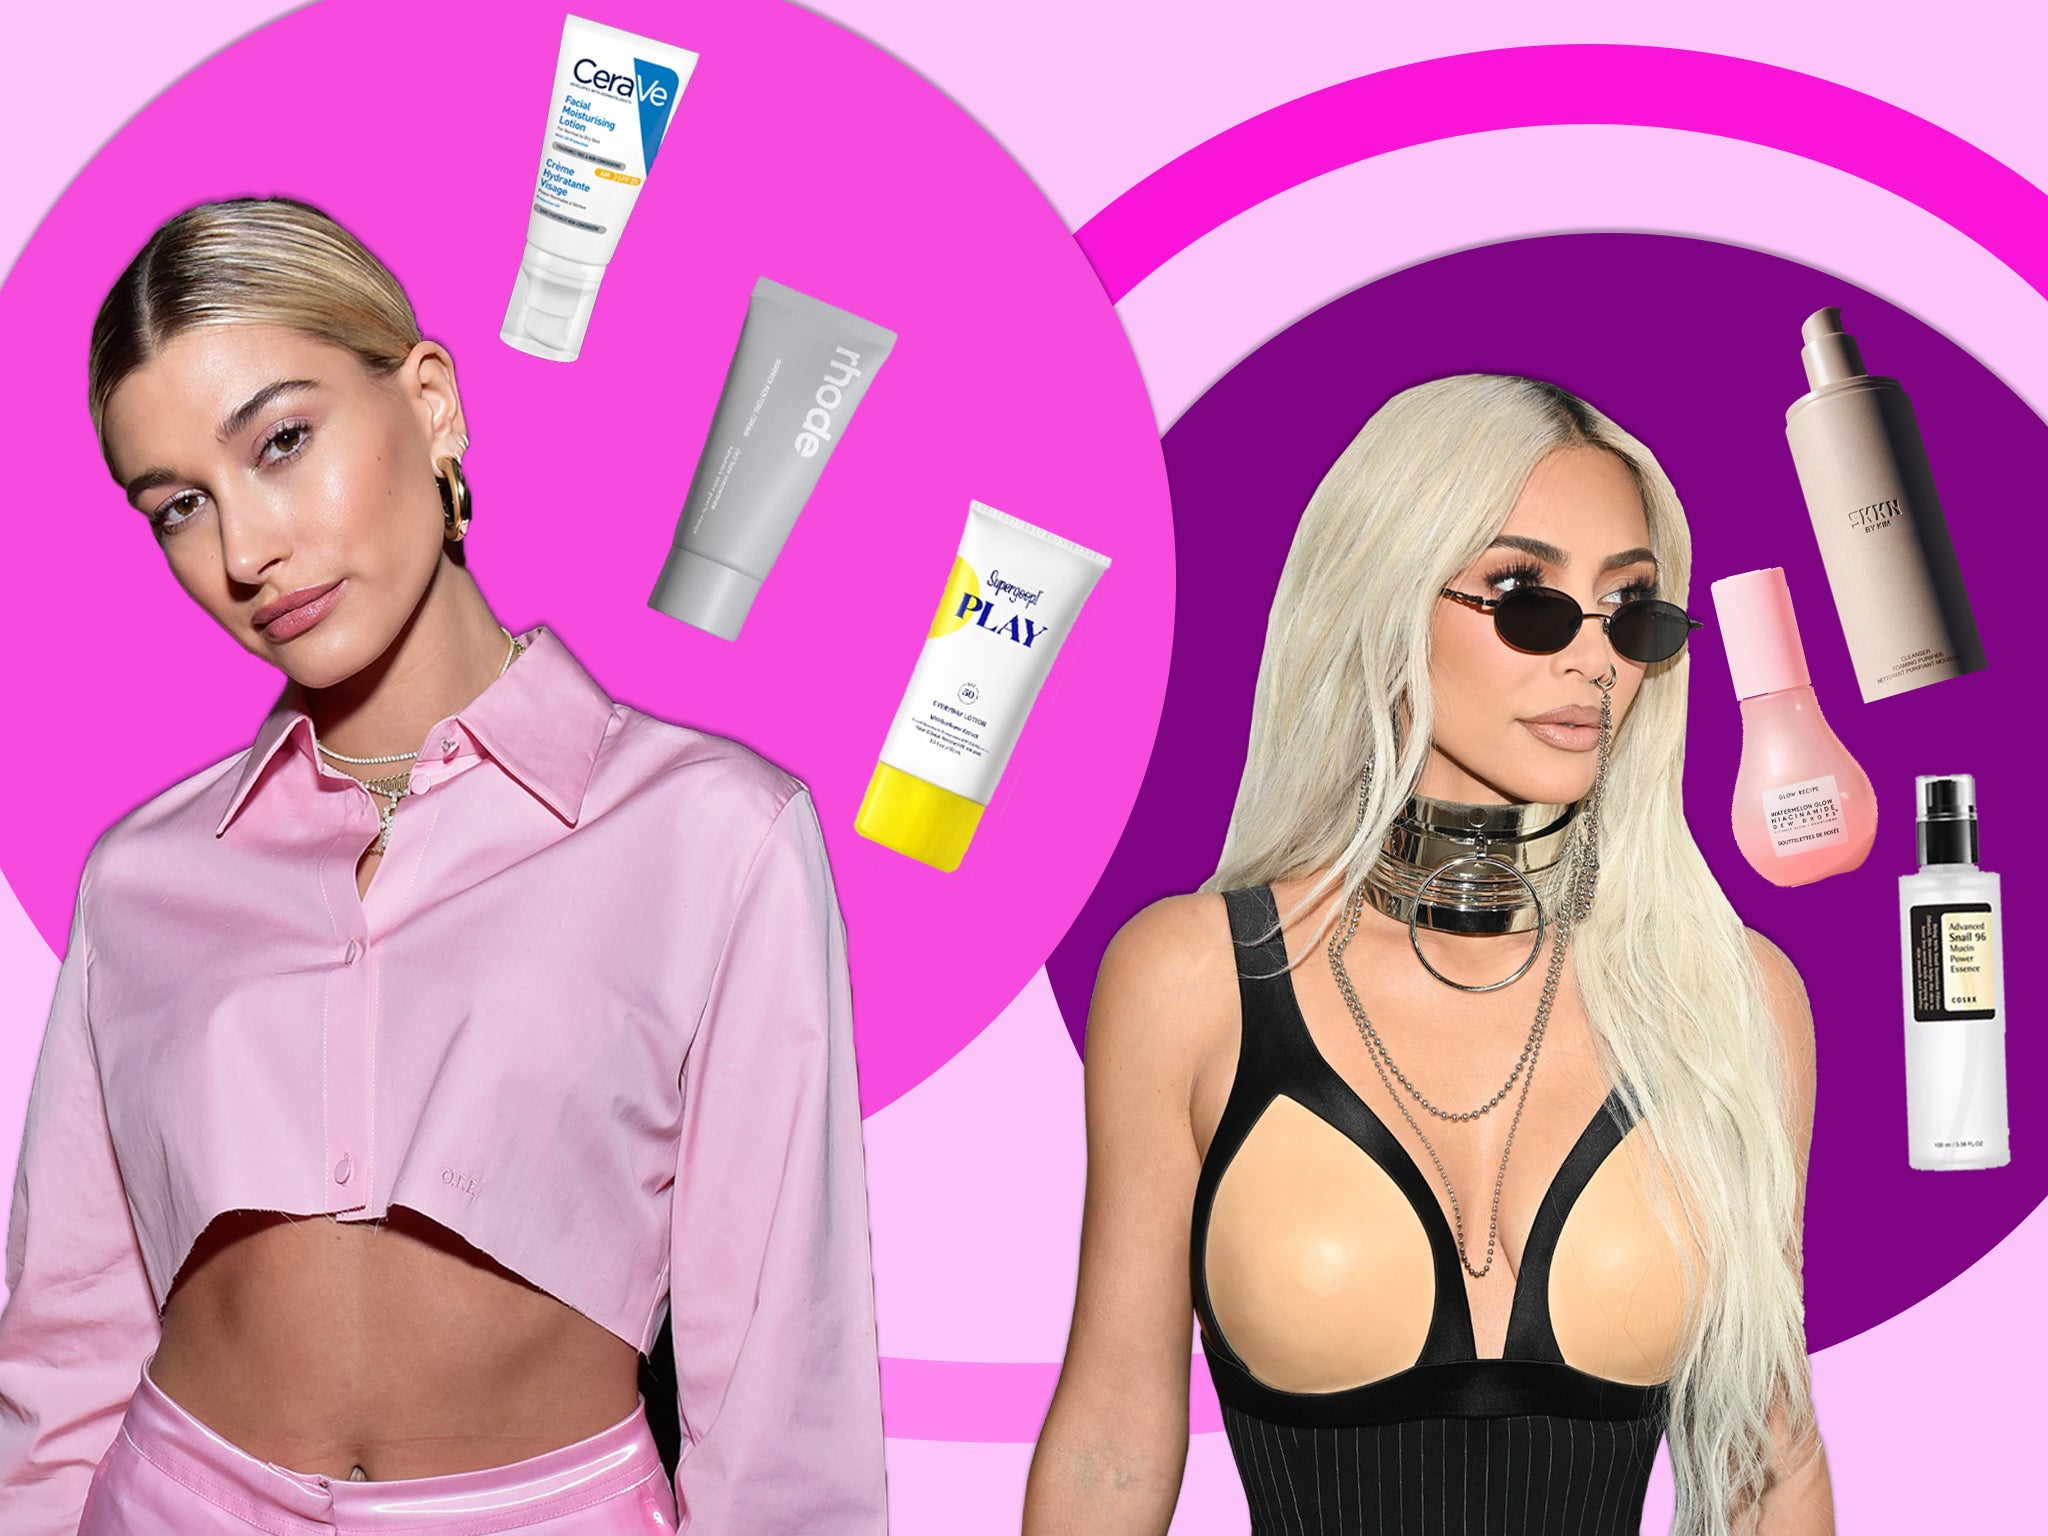 Hailey Bieber and Kim Kardashian launched skincare brands this year